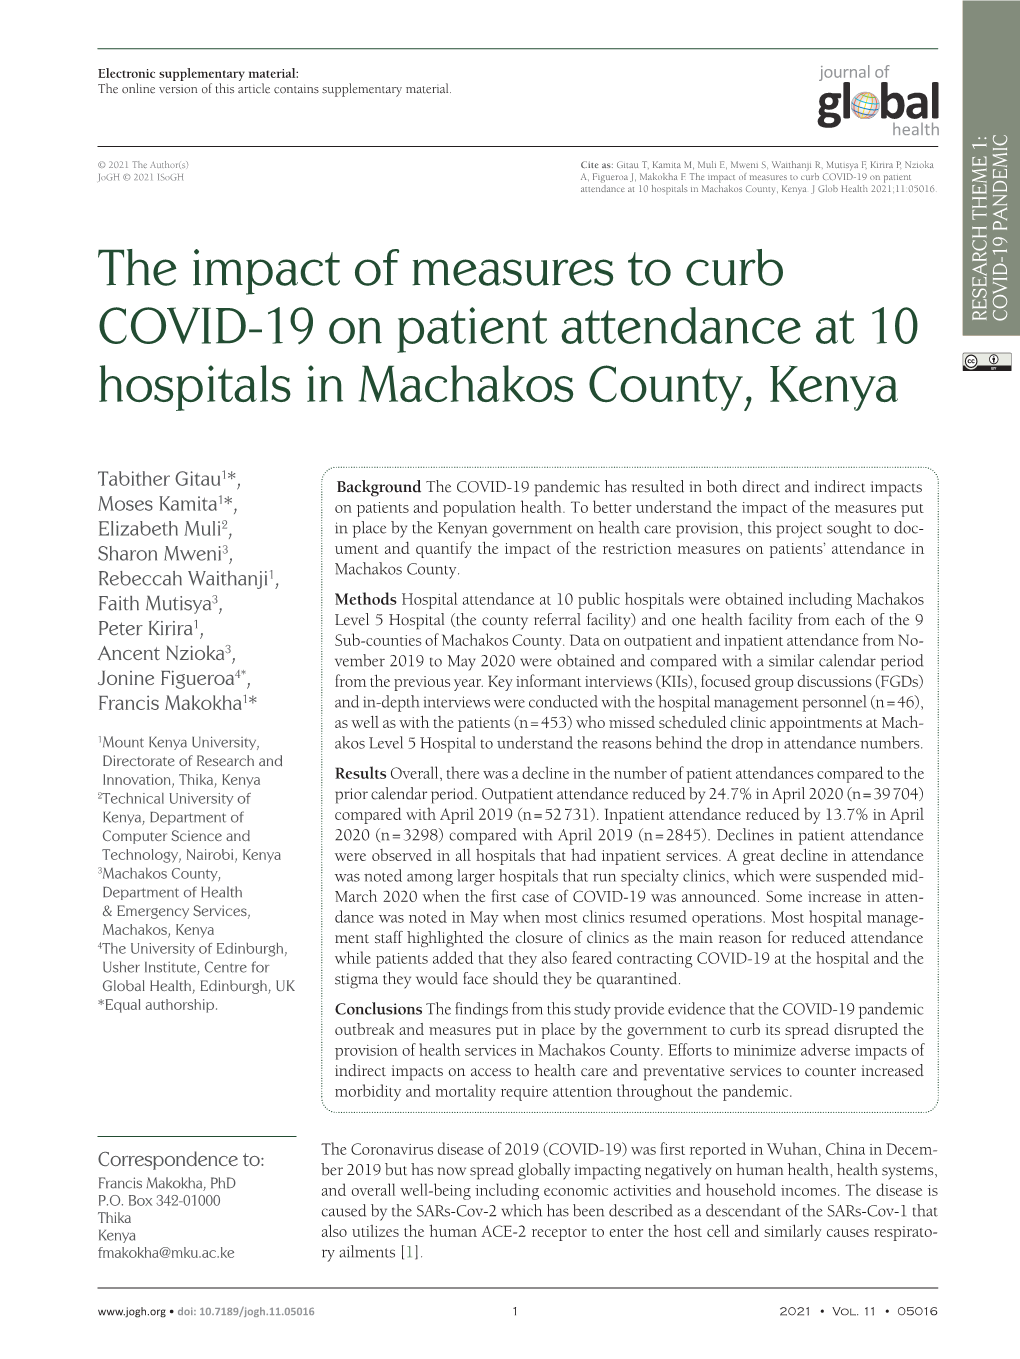 The Impact of Measures to Curb COVID-19 on Patient Attendance At